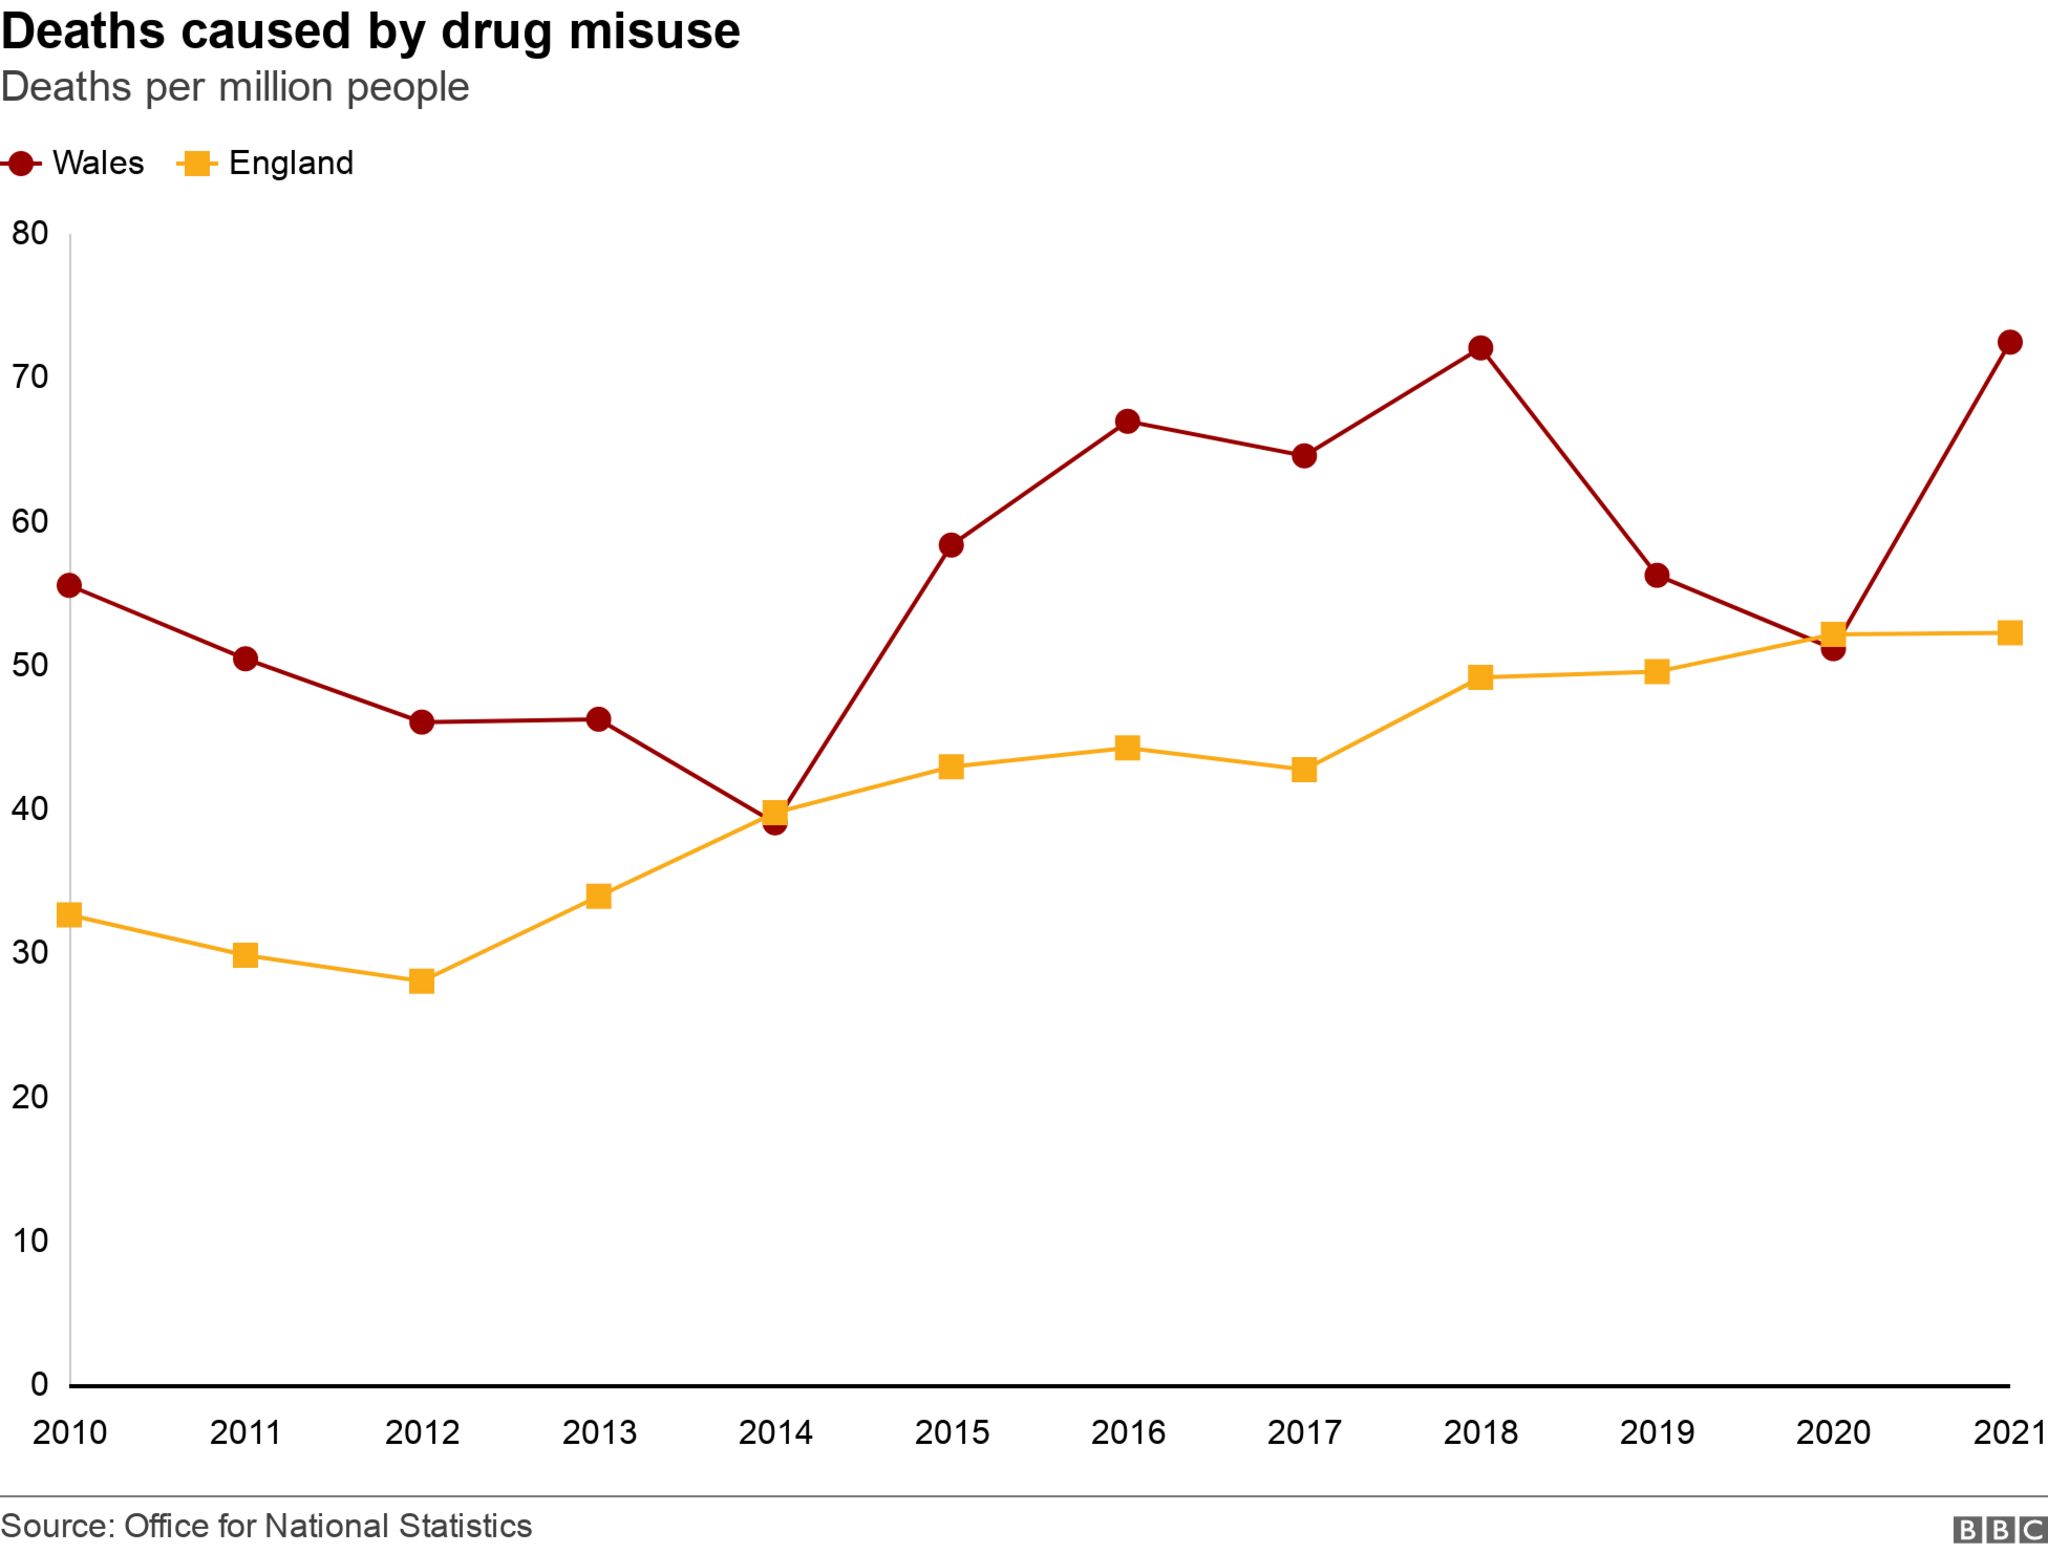 Graph showing comparison between Wales and England of drug misuse deaths per million people from 2010 to 2021. Wales is higher in all but two years